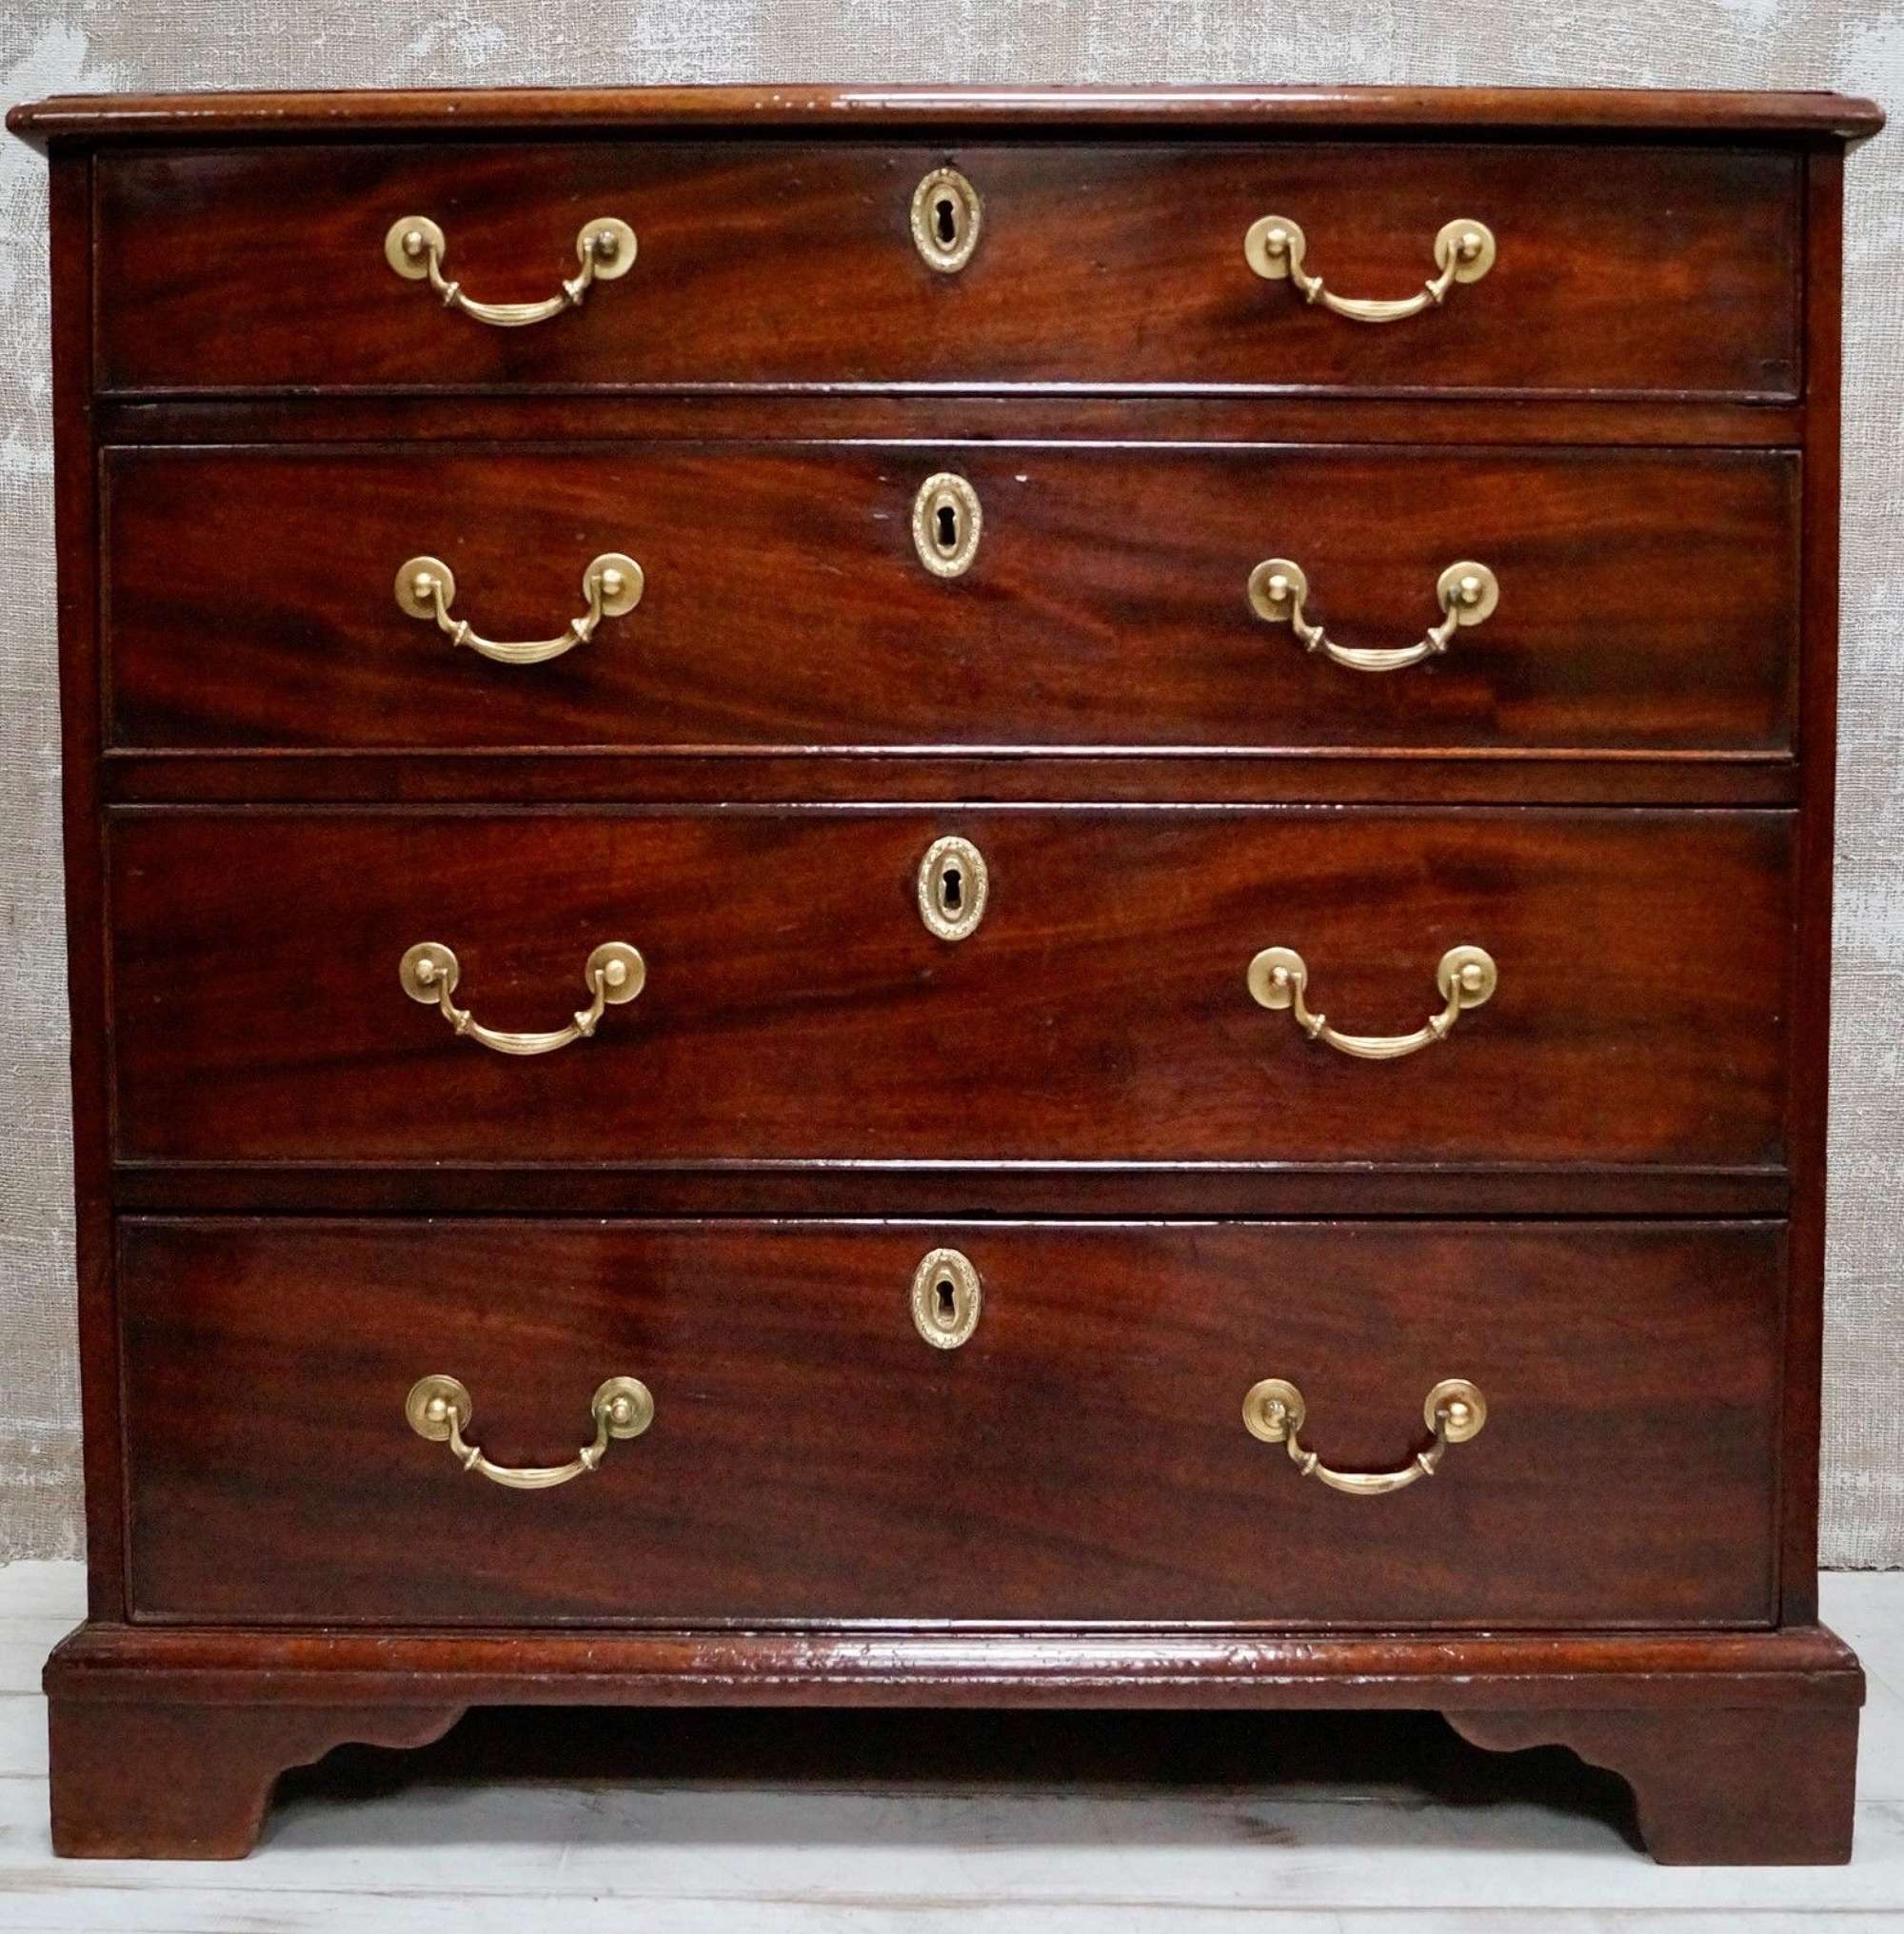 George ||| Mahogany Chest of Drawers